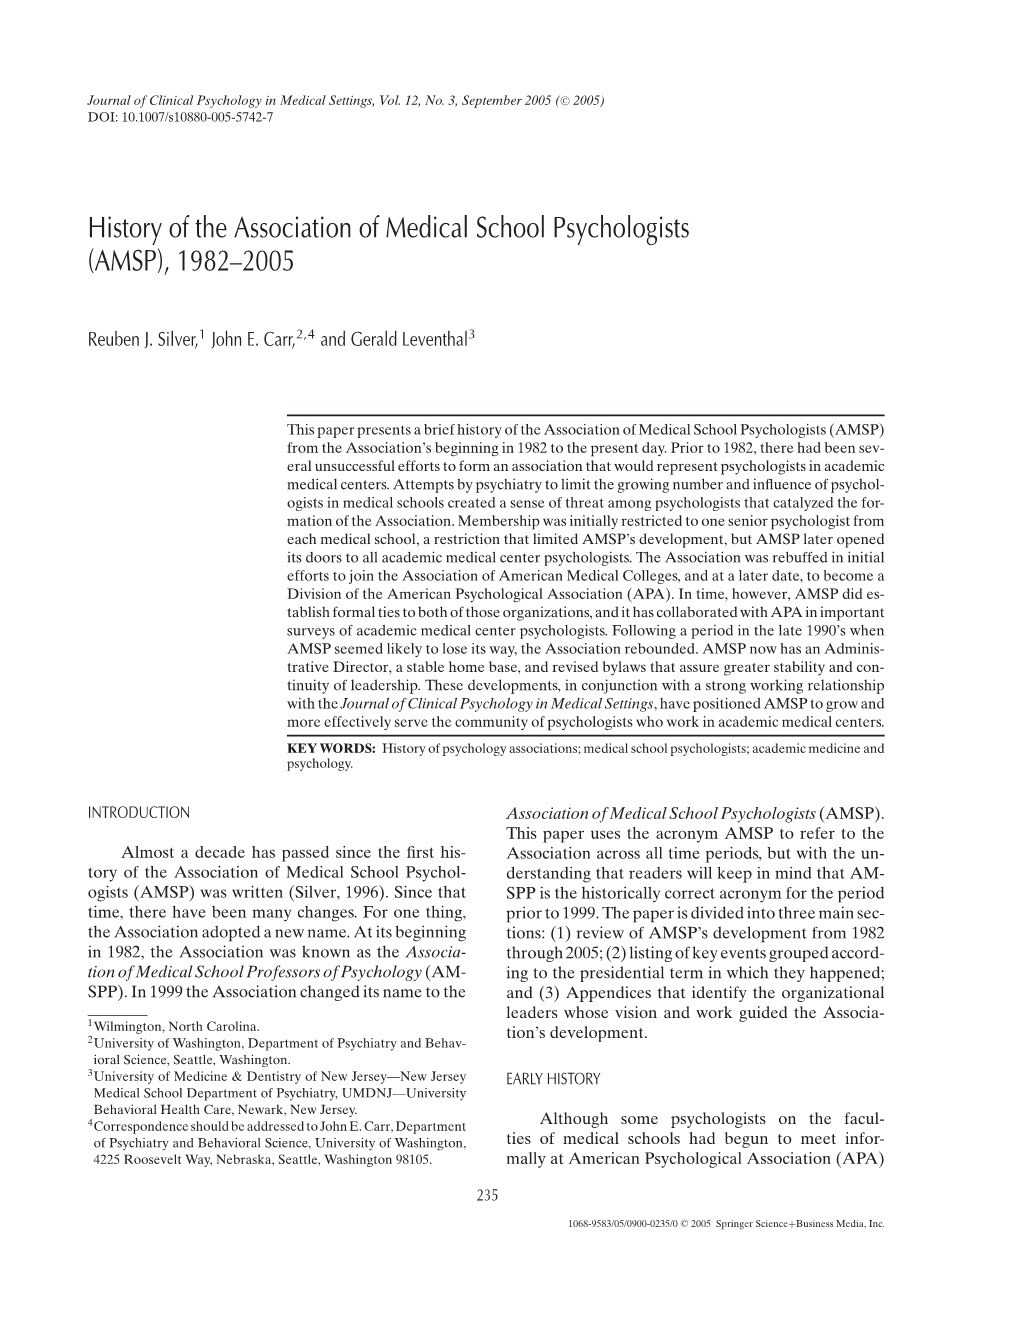 History of the Association of Medical School Psychologists (AMSP), 1982–2005